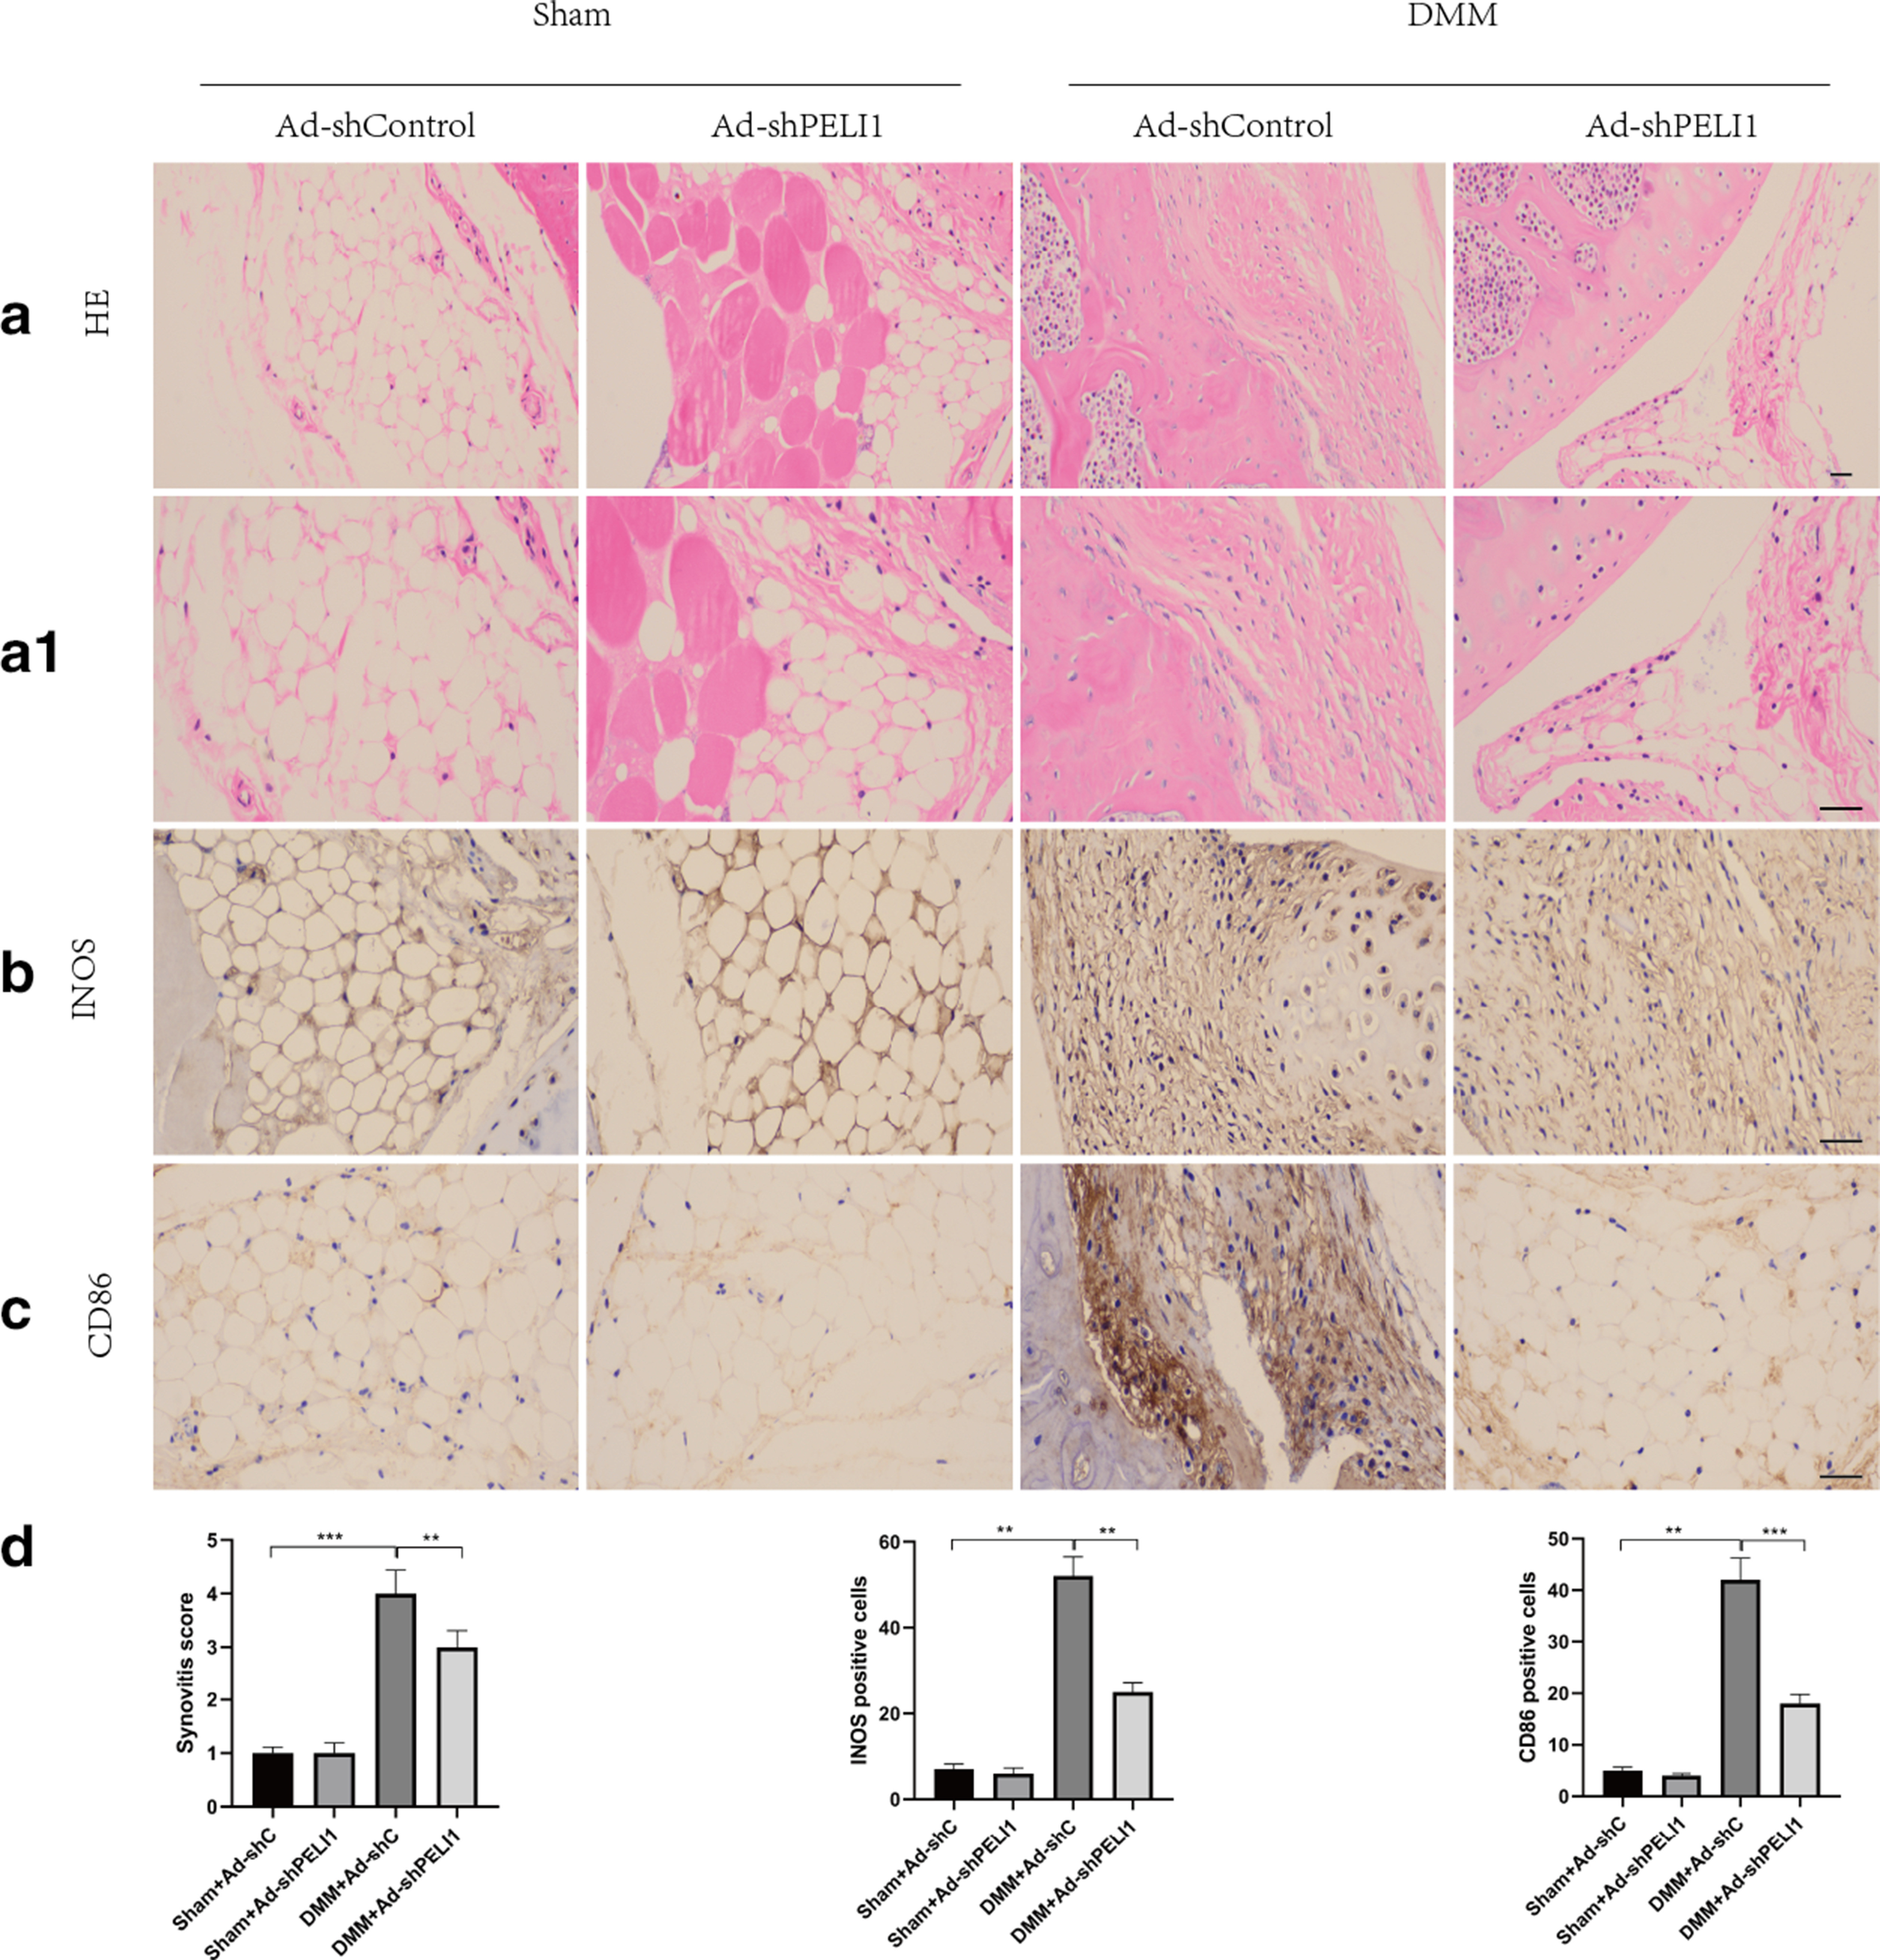 Fig. 7 
            Knockout of Pellino1 (Peli1) can reduce synovial inflammation in the destabilized medial meniscus (DMM) model. a) and a1) Haematoxylin and eosin (H&E) staining of synovium from AD-SH Control and AD-SH Peli1 mice two months after DMM surgery. b) Inducible nitric oxide synthase (iNOS) immunostaining images of synovium from AD-SH Control and AD-SH Peli1 mice two months after DMM surgery. c) CD86 immunostaining images of synovium from AD-SH Control and AD-SH Peli1 mice two months after DMM surgery. d) Quantitative analysis of synovitis score and iNOS and CD86 expression. **p < 0.01, ***p < 0.001 compared with Sham + AD SH Control or DMM + AD SH Control group. measuring scale = 100 μm.
          